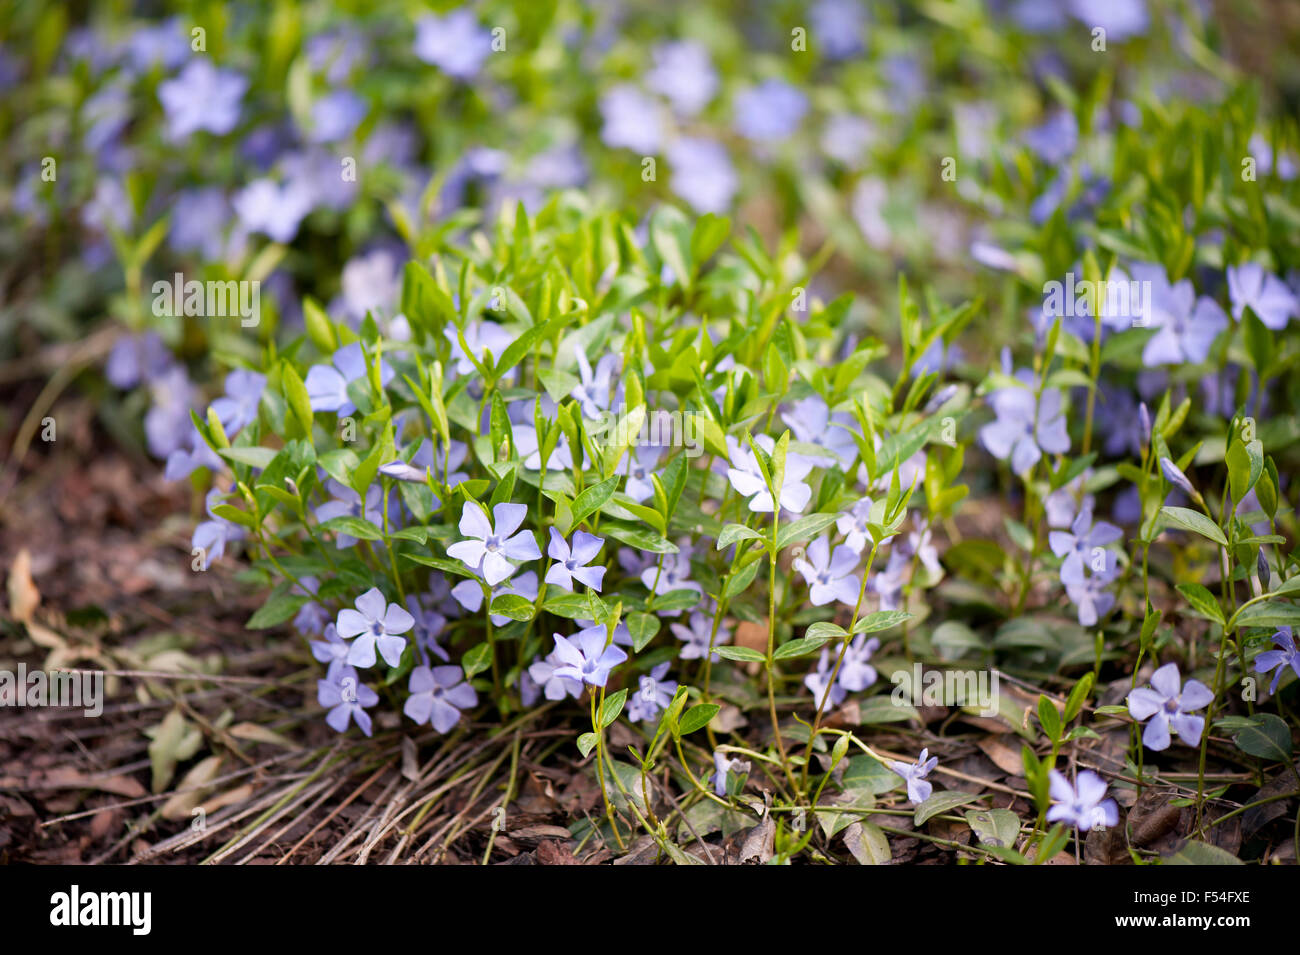 Vinca violet purple clump, flowers garden bedding, Apocynaceae family periwinkle or myrtle bright flowering plants with vibrant Stock Photo